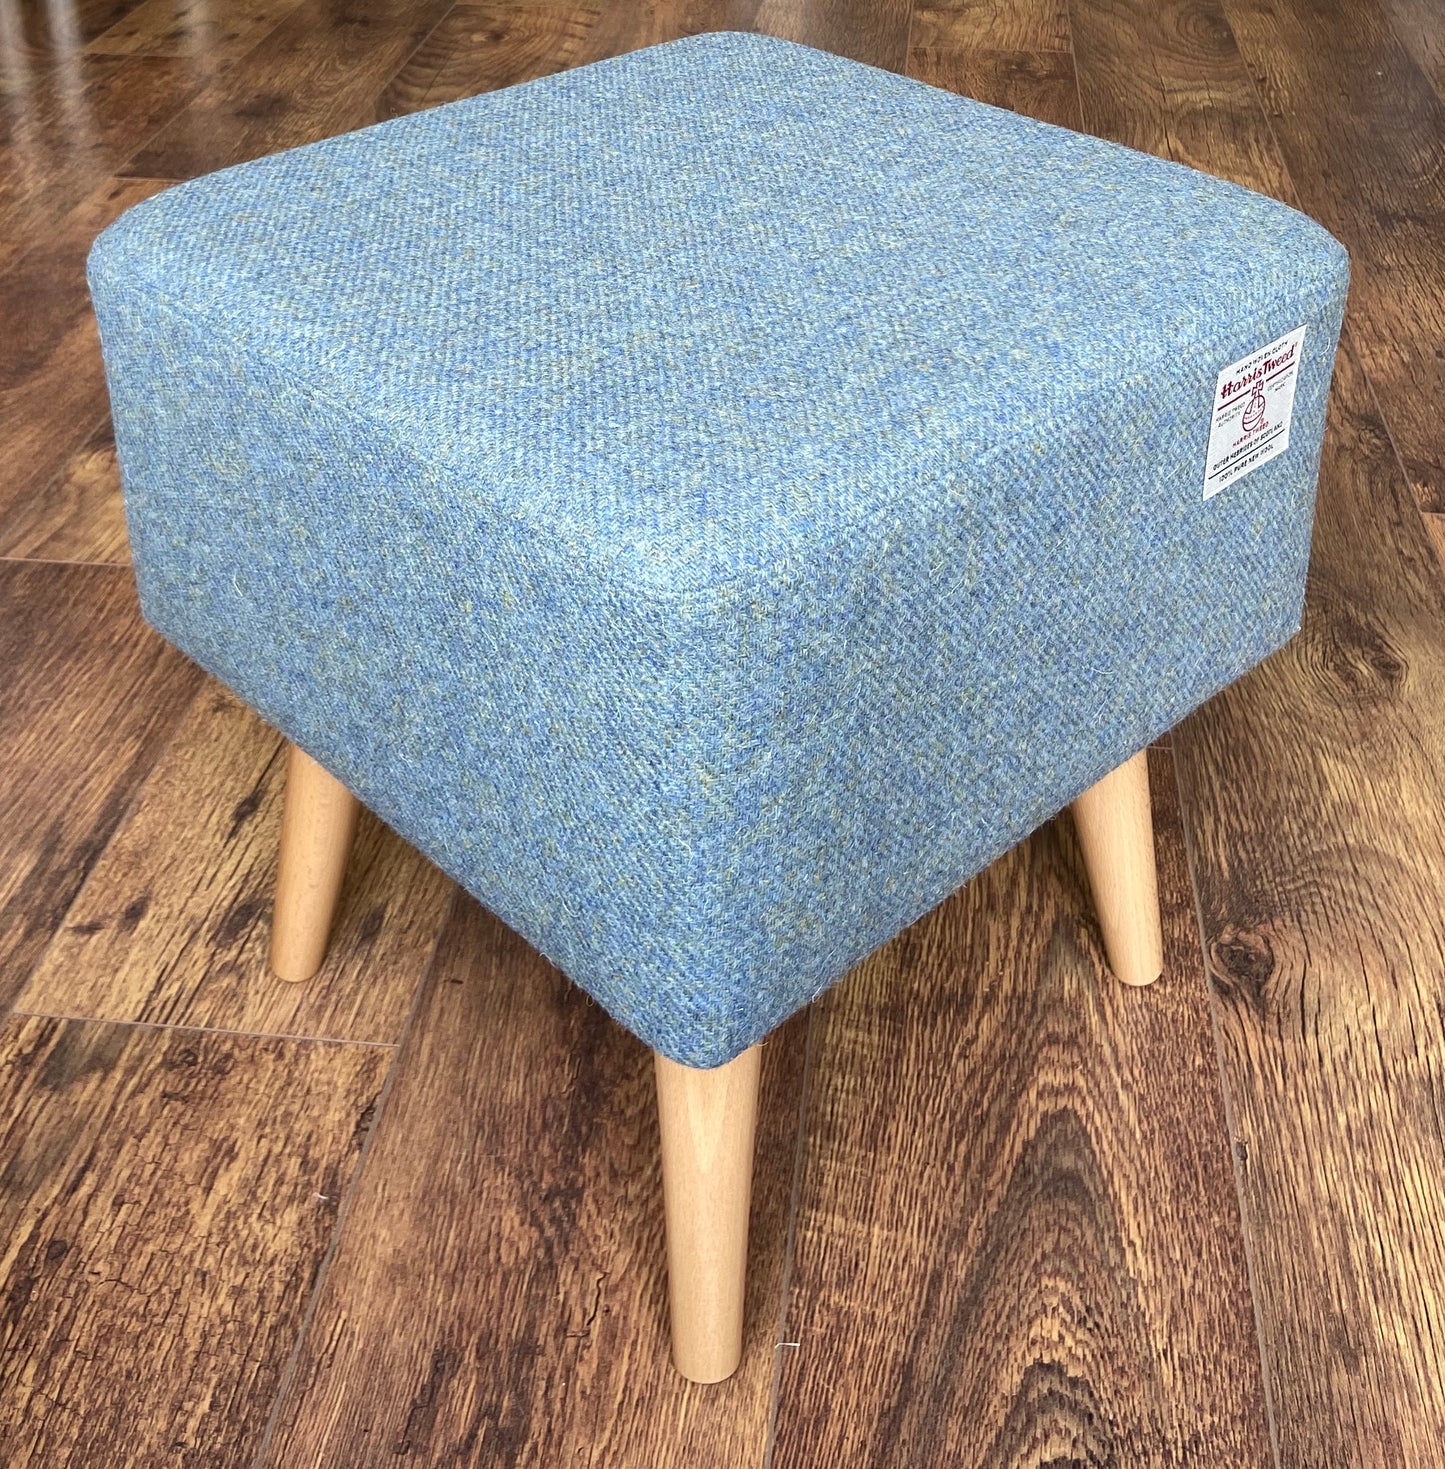 Sky Blue Square Footstool, Harris Tweed with Varnished Wooden Legs